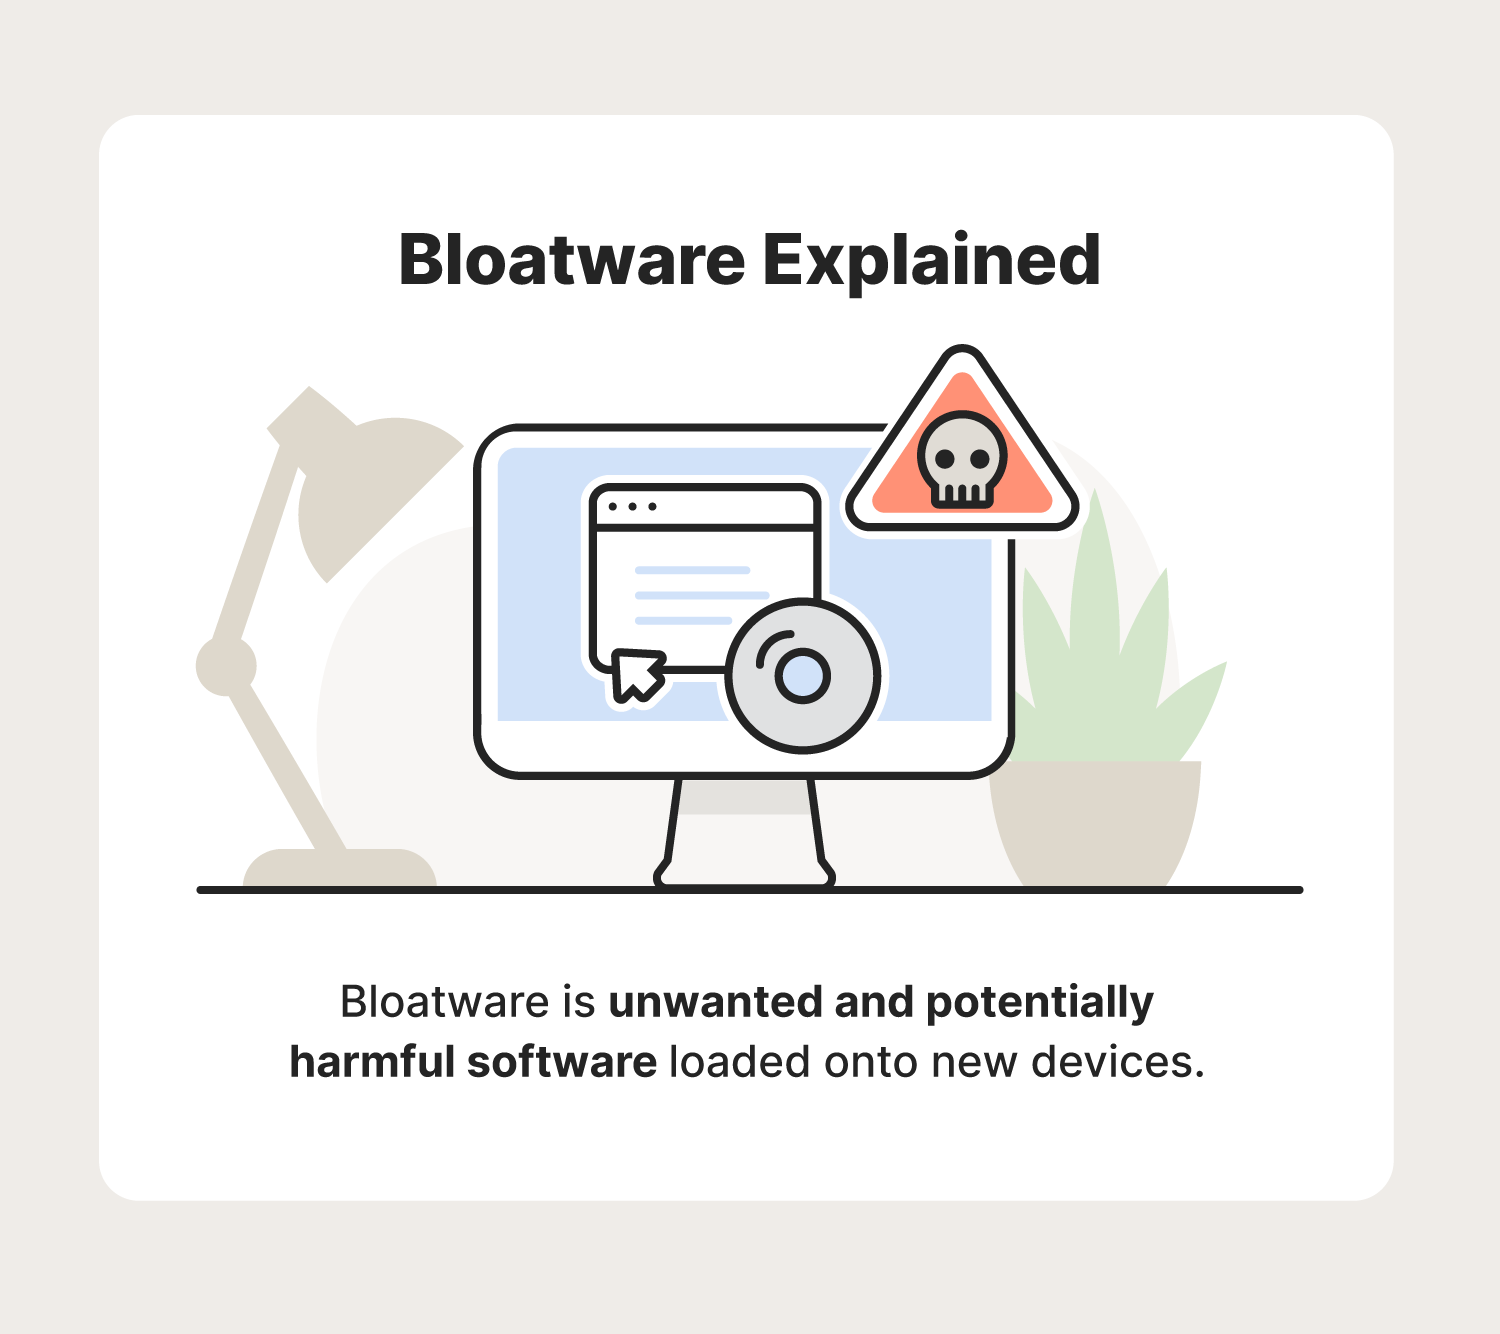 A graphic explains bloatware, an unwanted and potentially dangerous form of software.